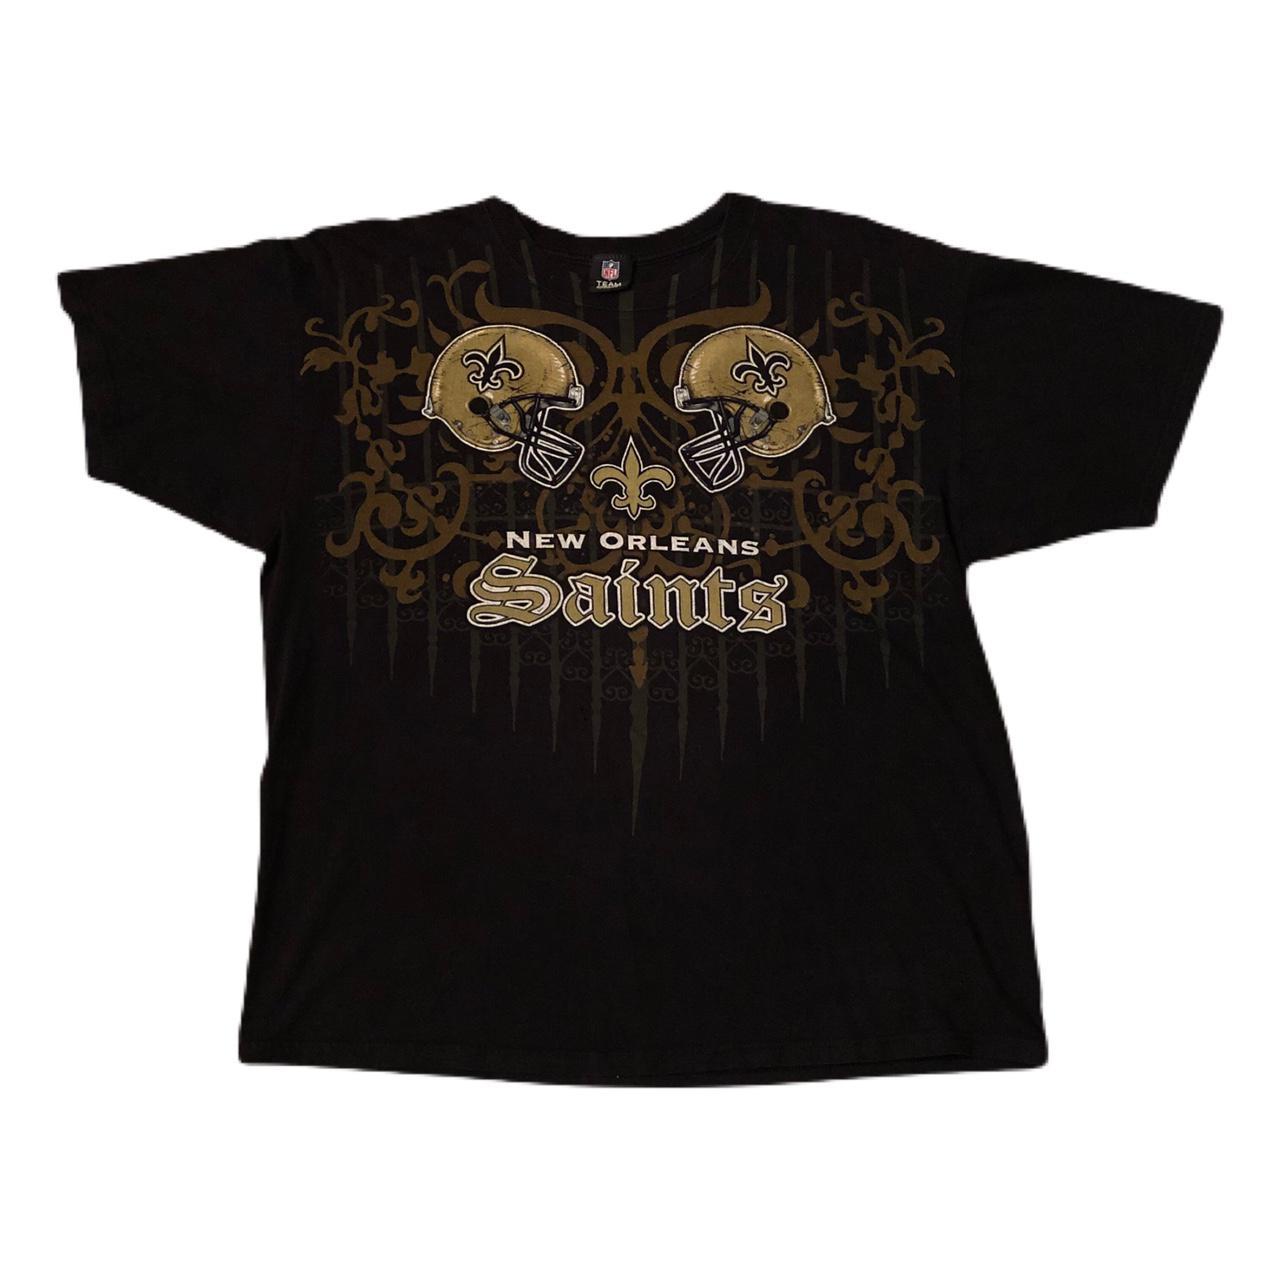 Product Image 1 - New Orleans saints nfl football